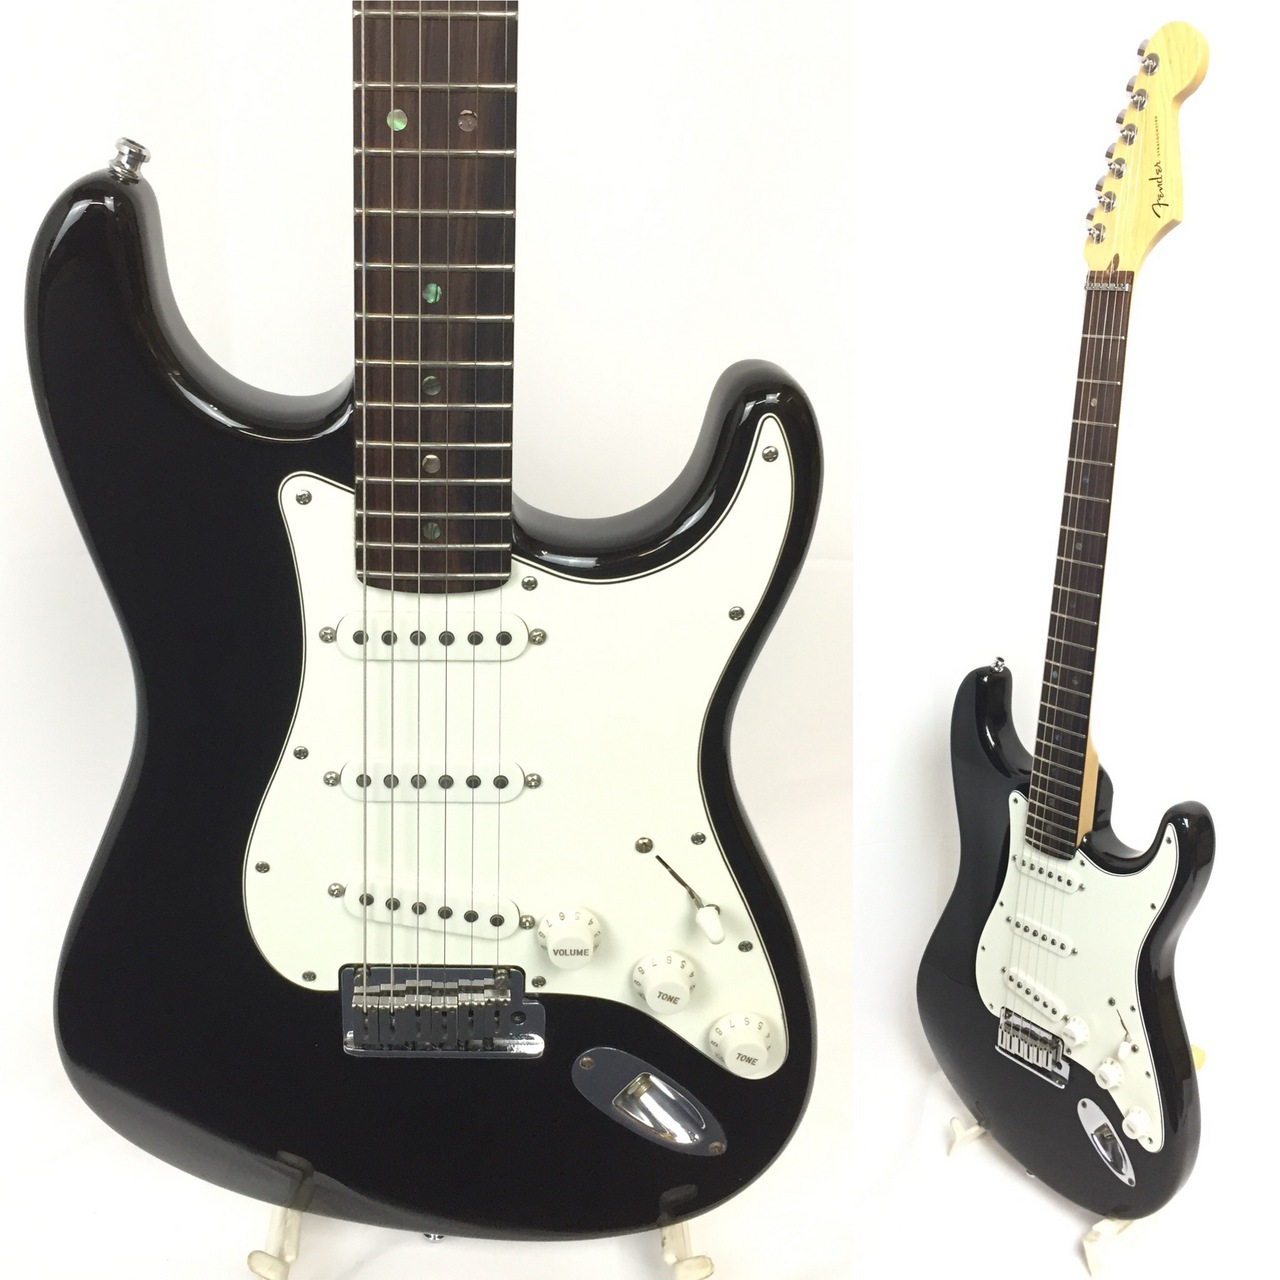 Fender American Deluxe Stratocaster with Suhr ML Pickups Mod 